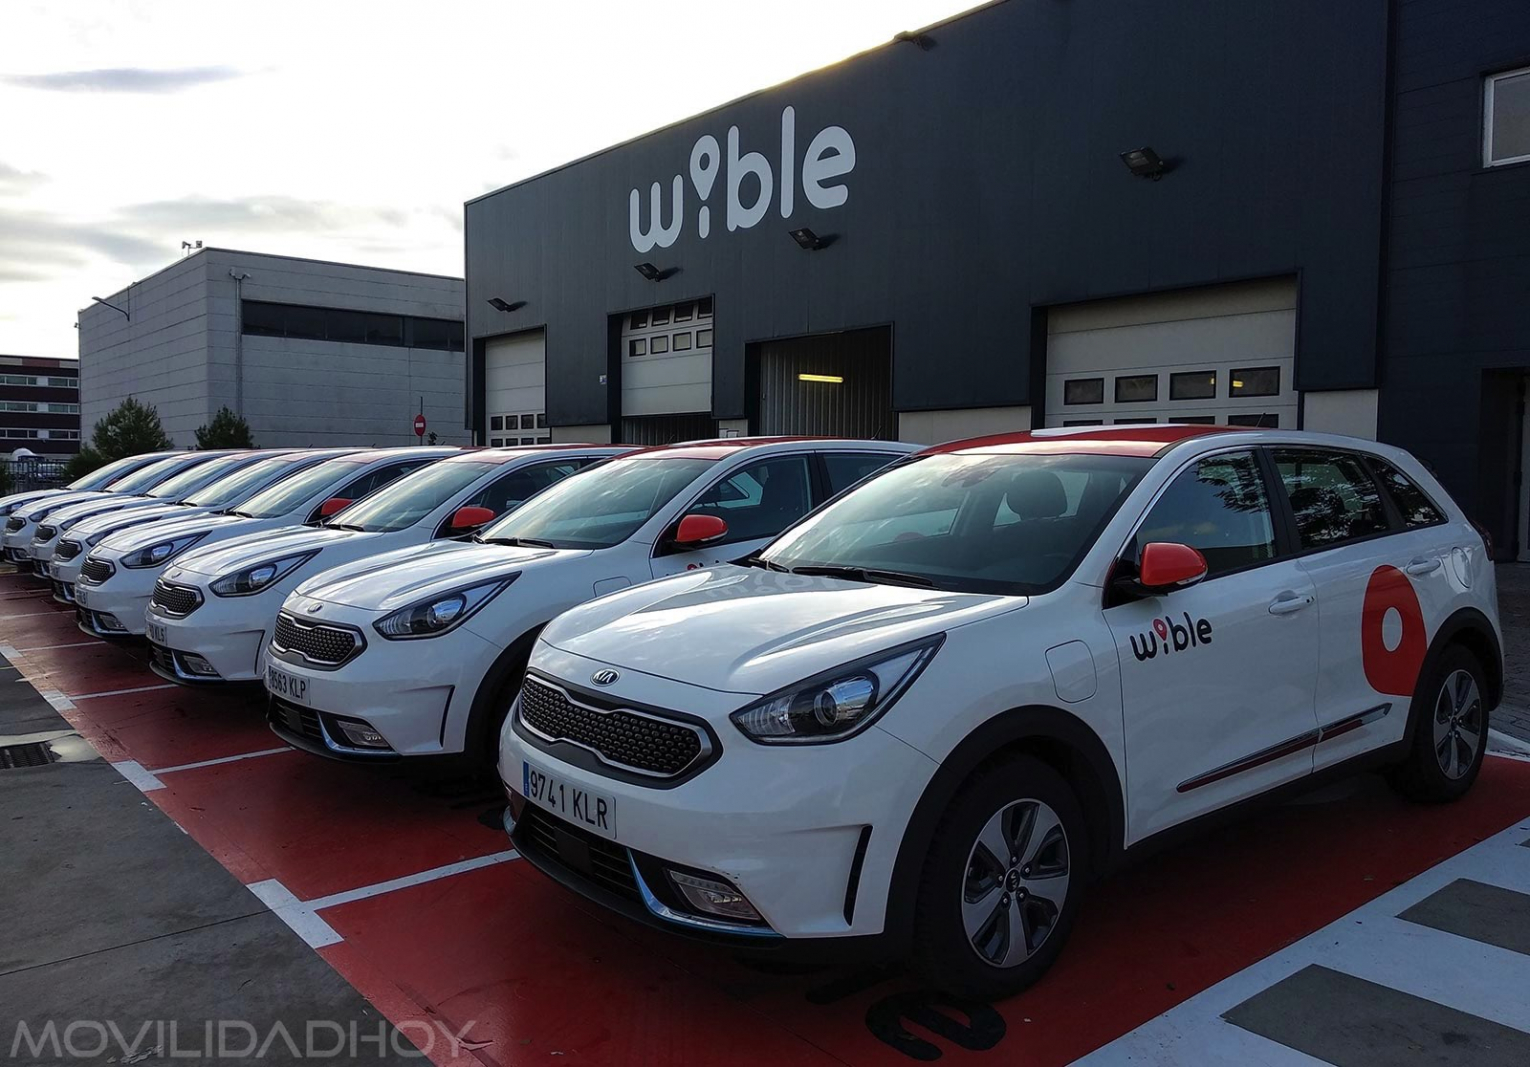 Wible carsharing